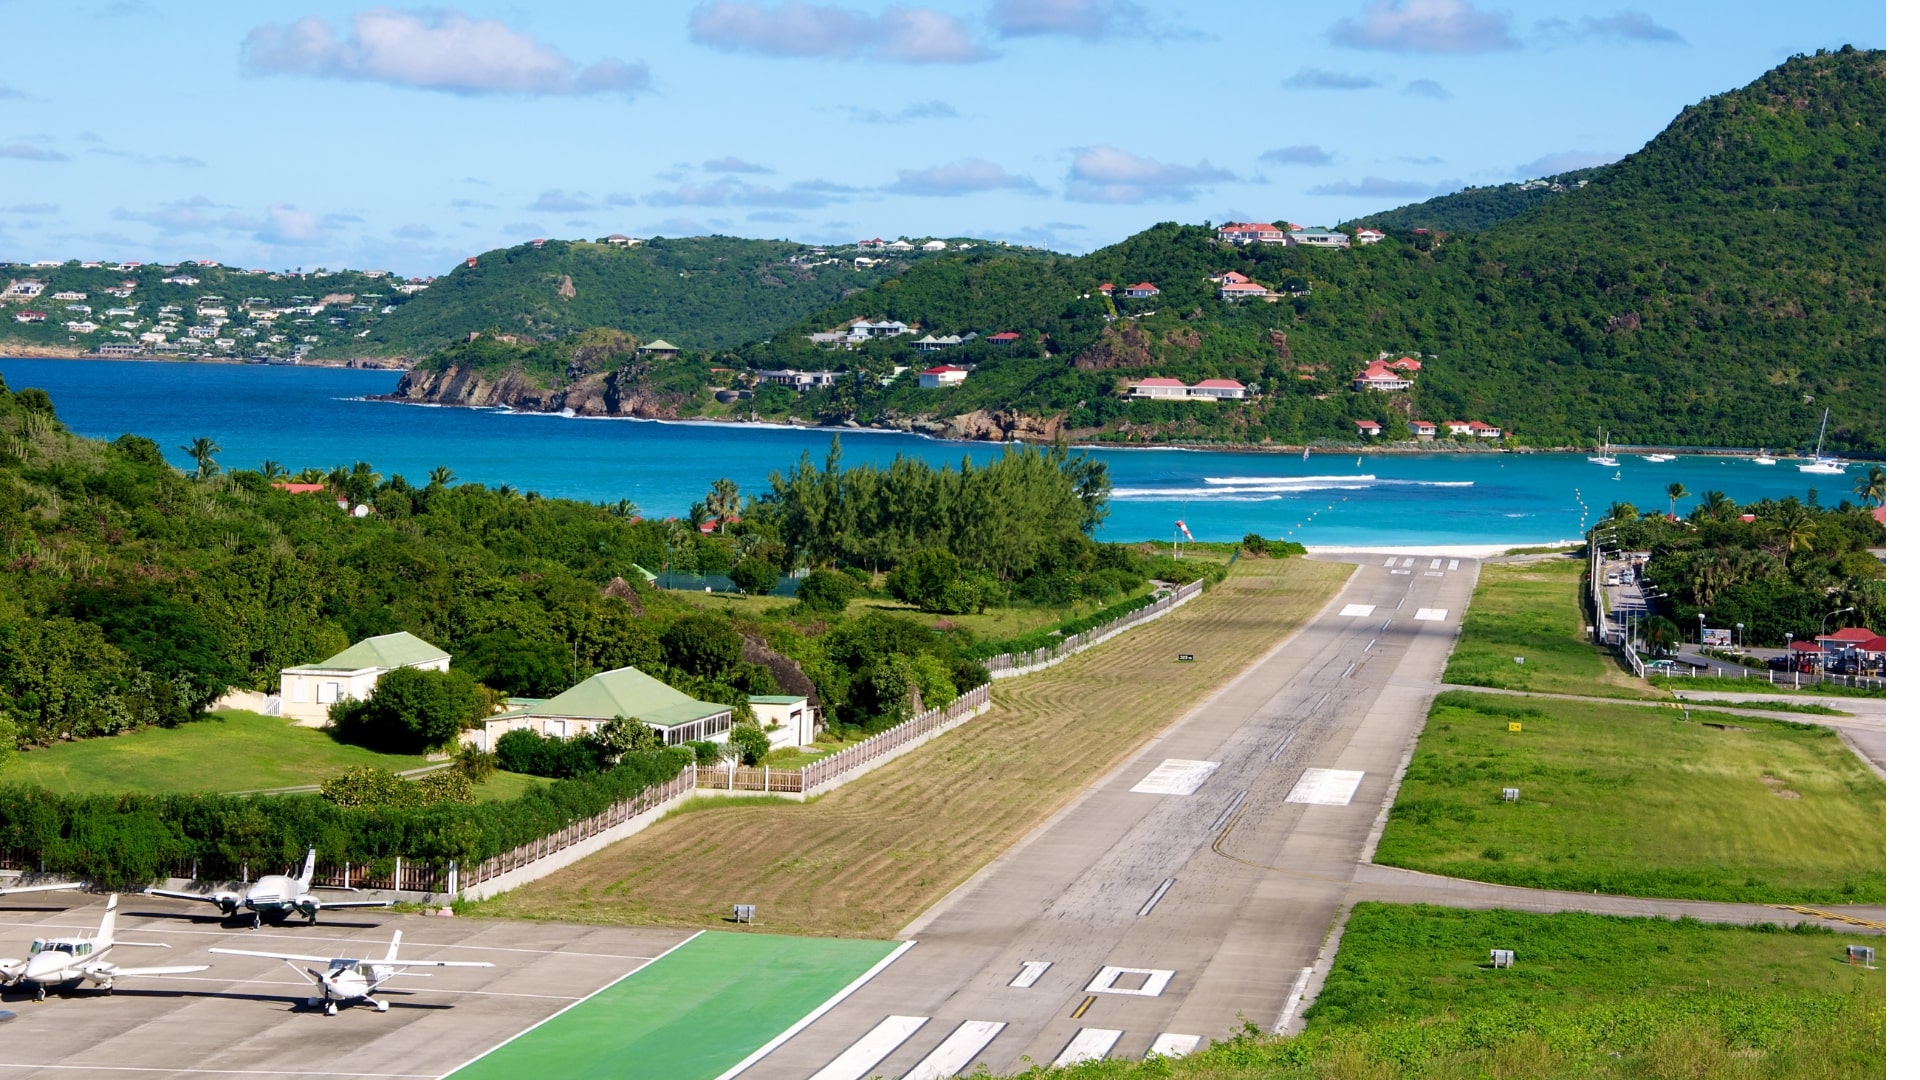 Discover one of the most beautiful gems of the caribbean: St Barths